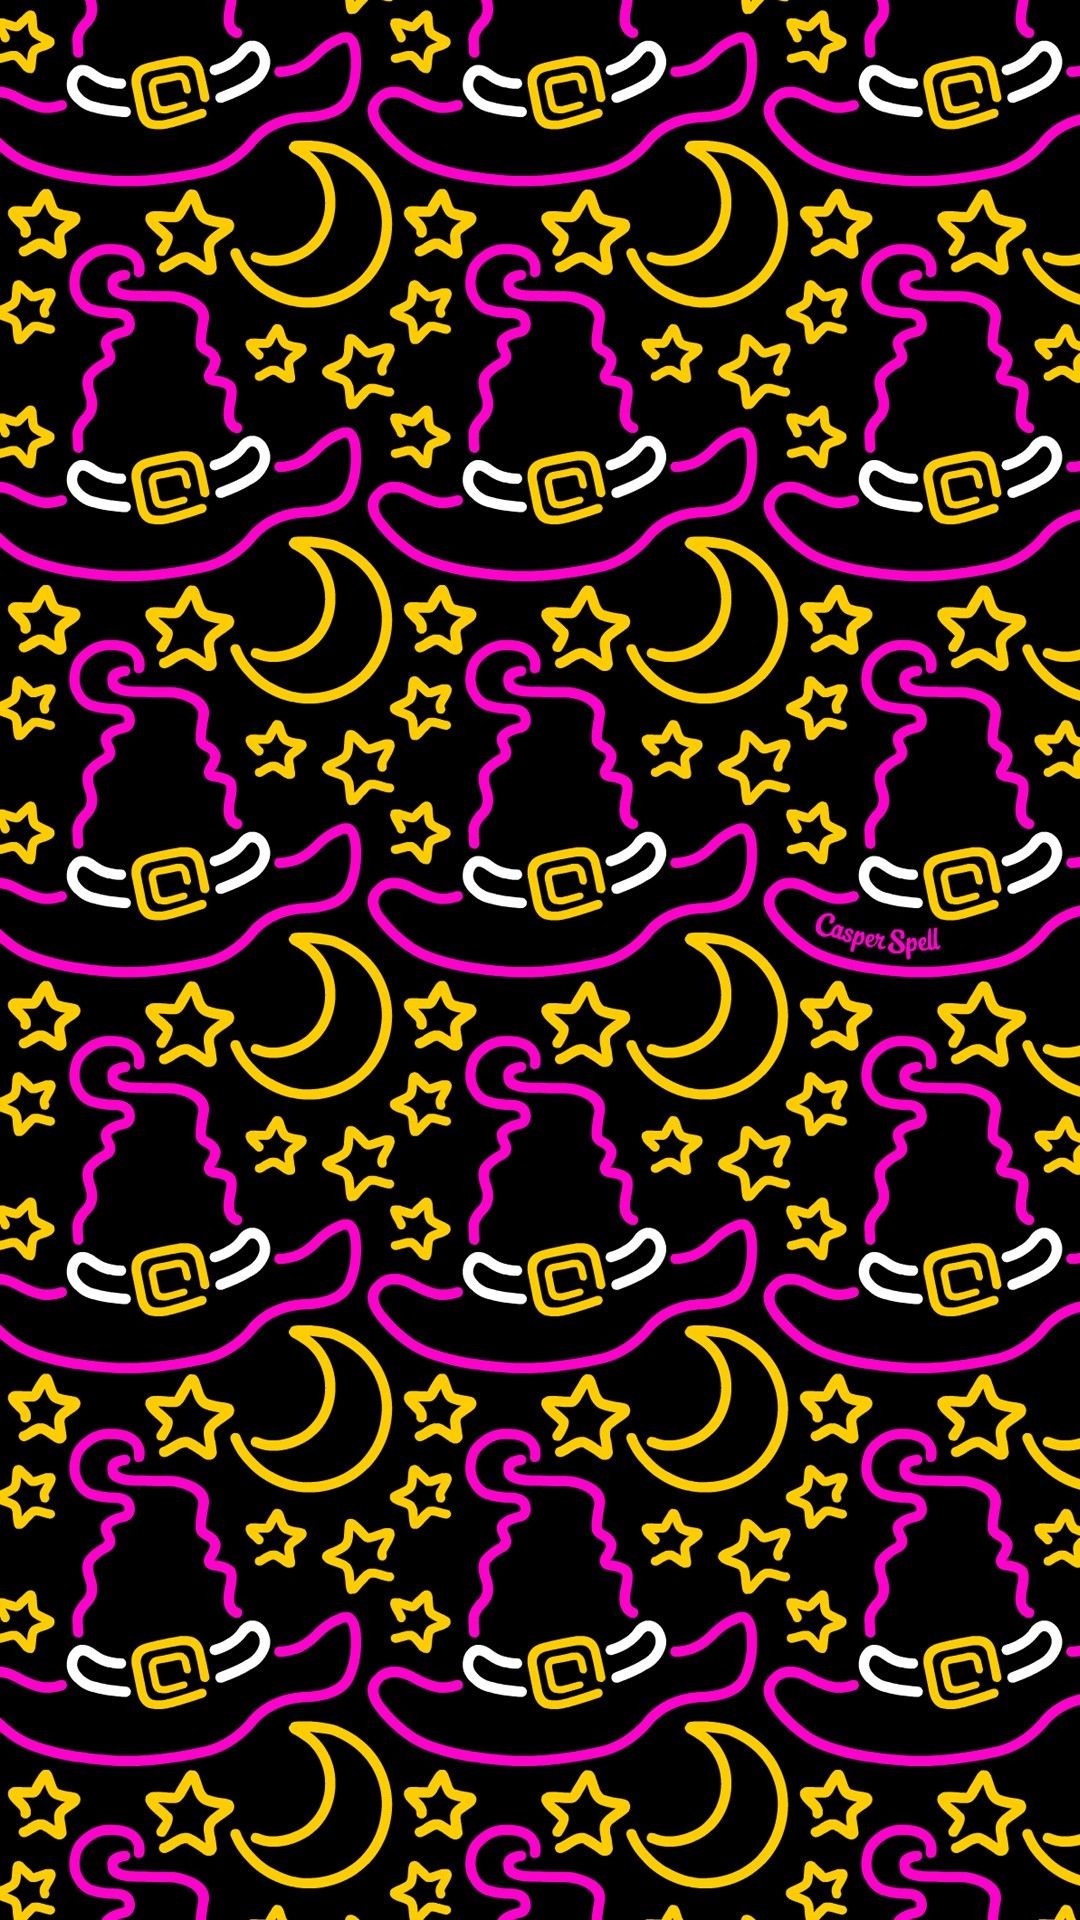 1080x1920 Neon witch pattern sign witches witchcraft coven Halloween cute spooky  repeat surface design art illustration wallpaper phone Casper Spell ...